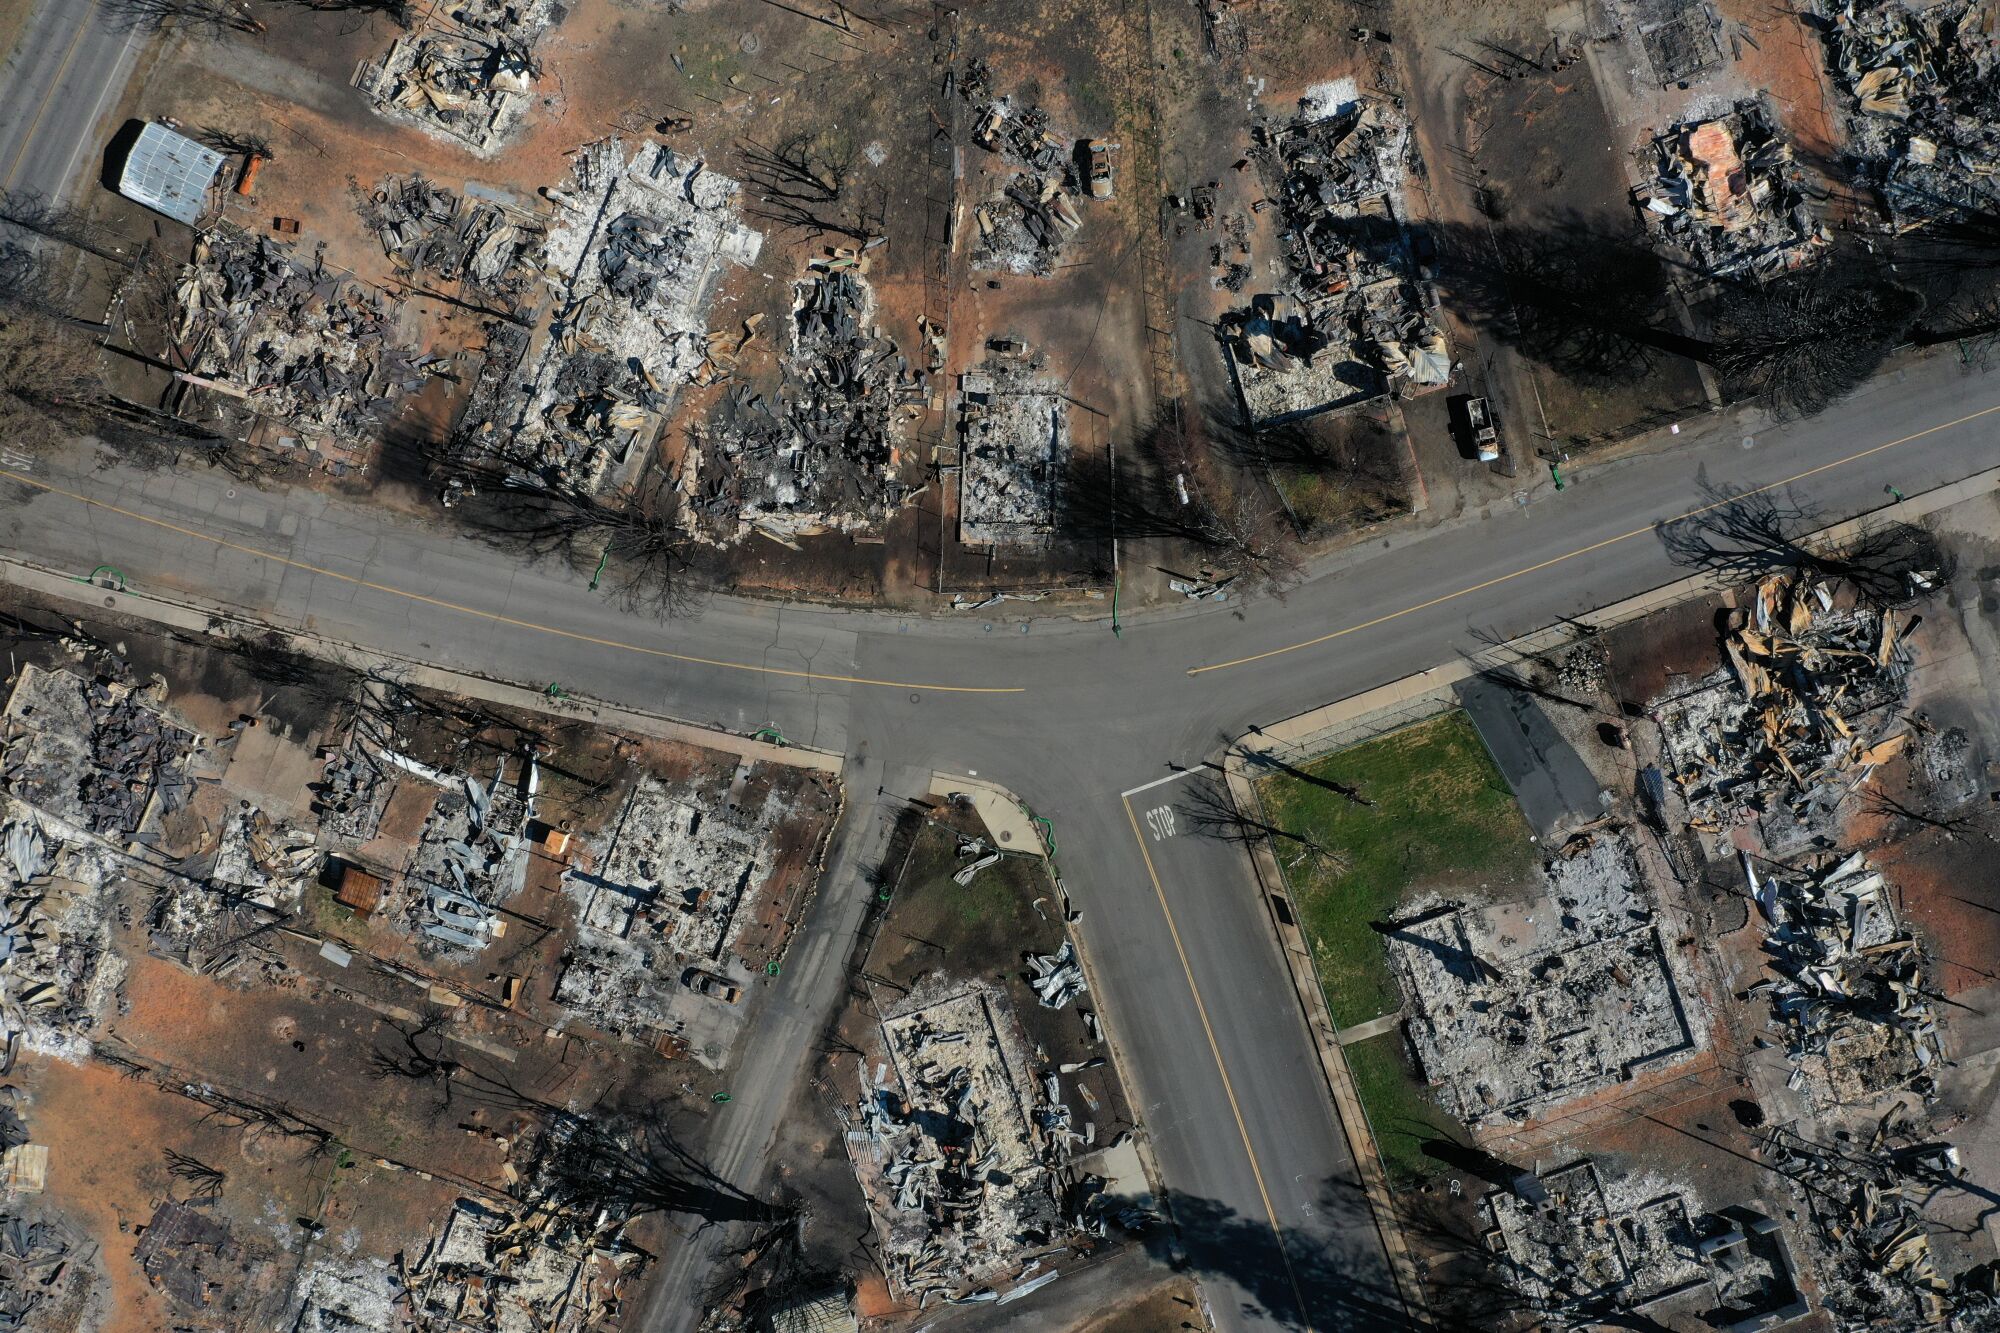 Aerial view of a fire-destroyed neighborhood